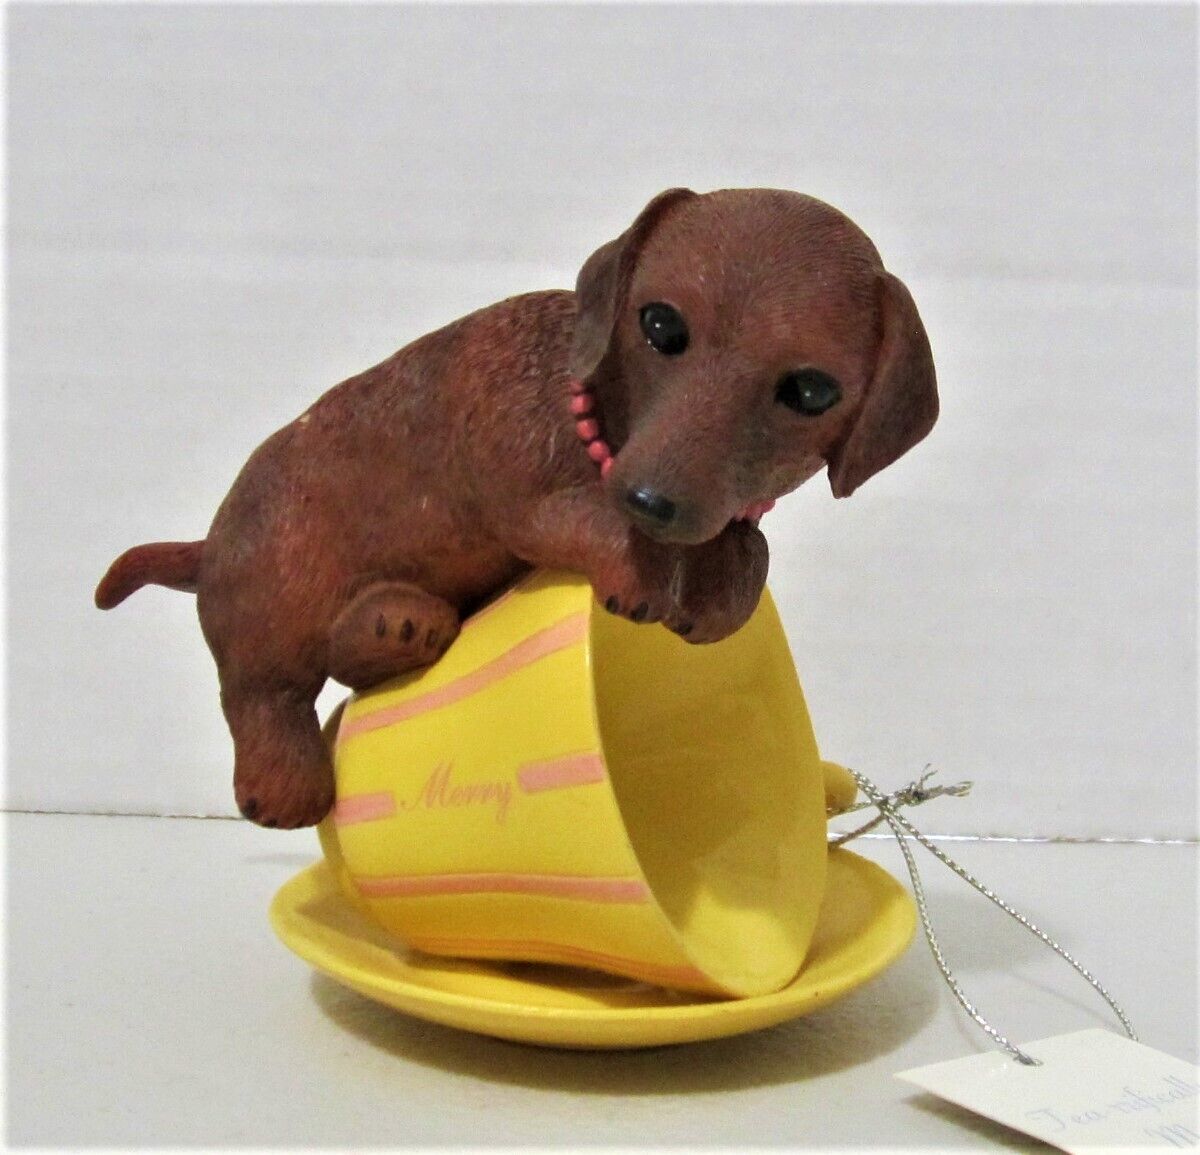 Hamilton Collection Dachshunds with Personali-Tea \